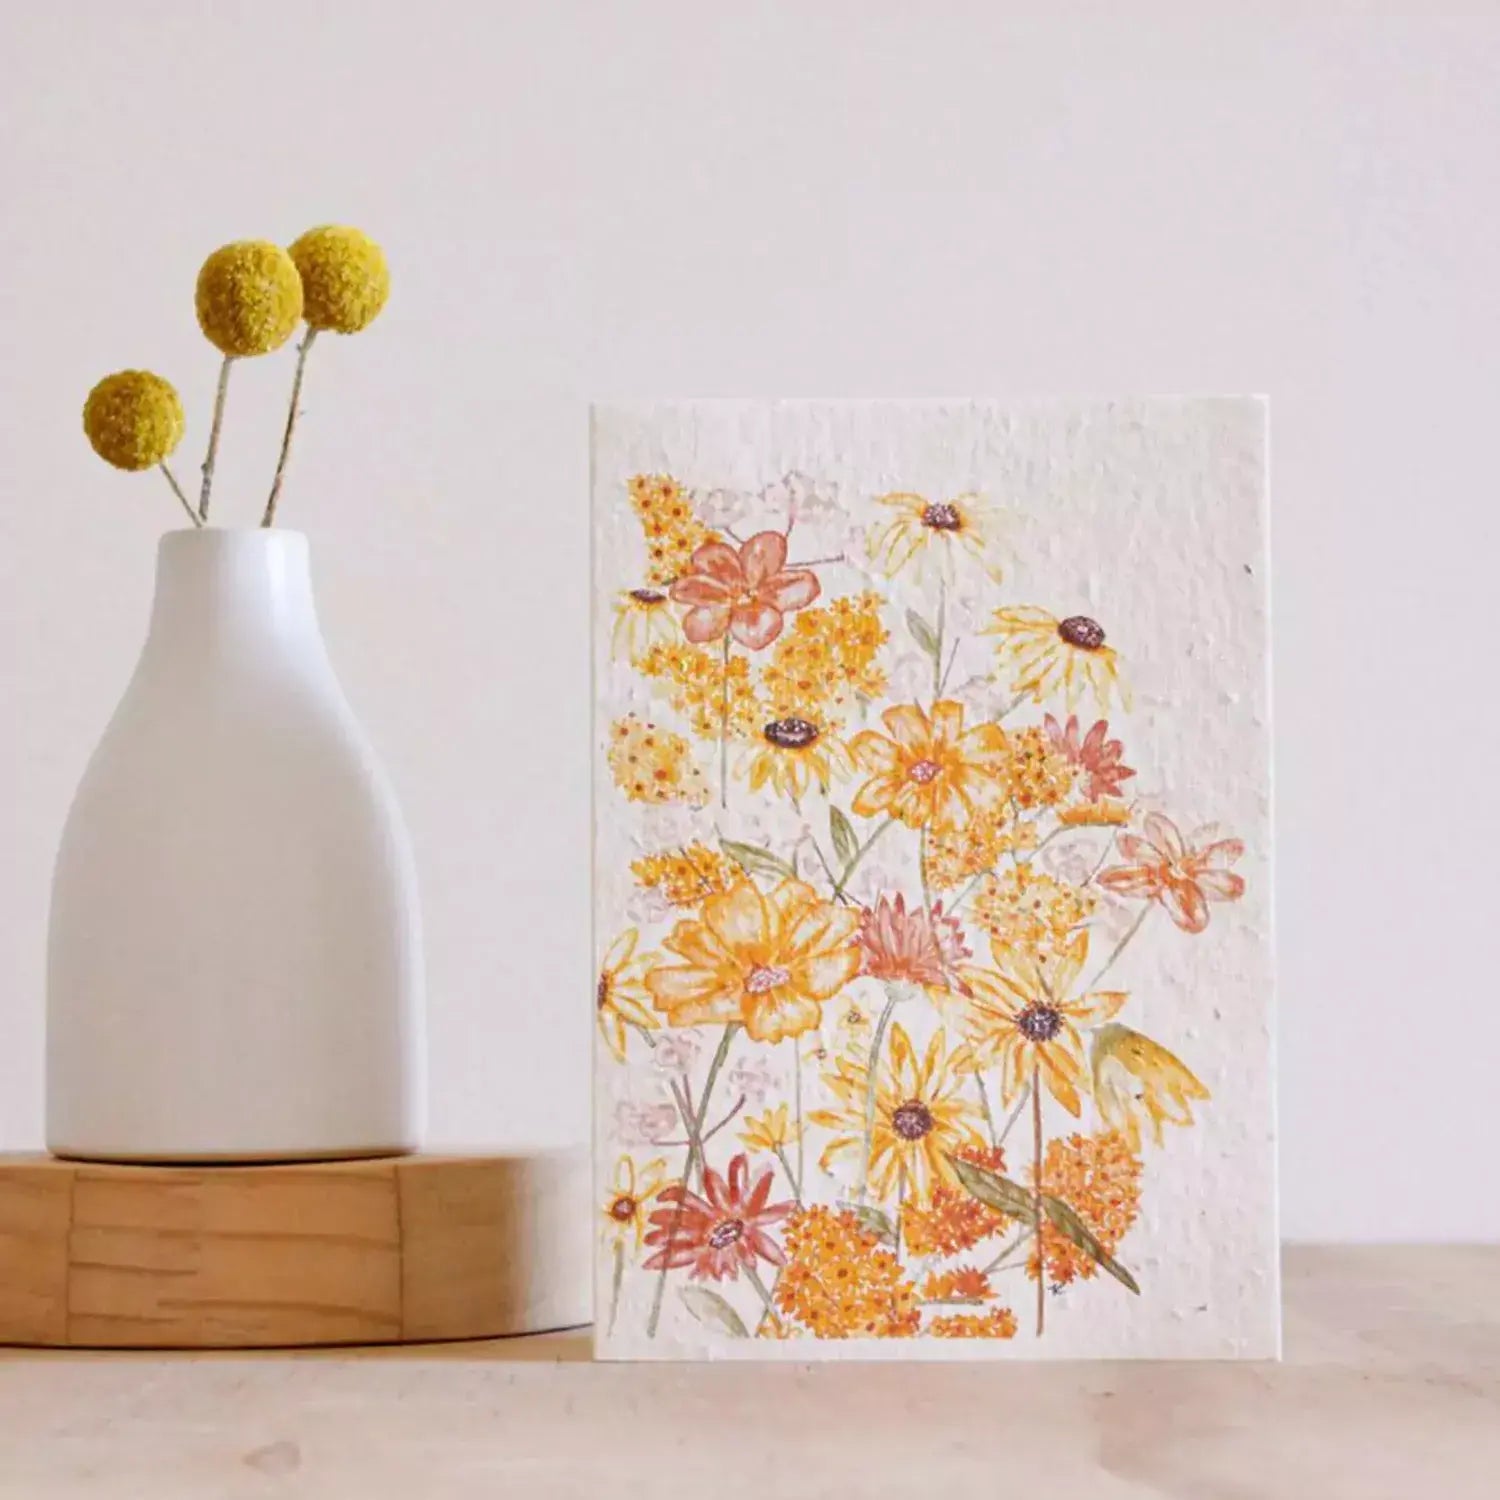 Seeded Plantable Greeting Card by Hello Petal - Shades of Sunshine Sunshine 